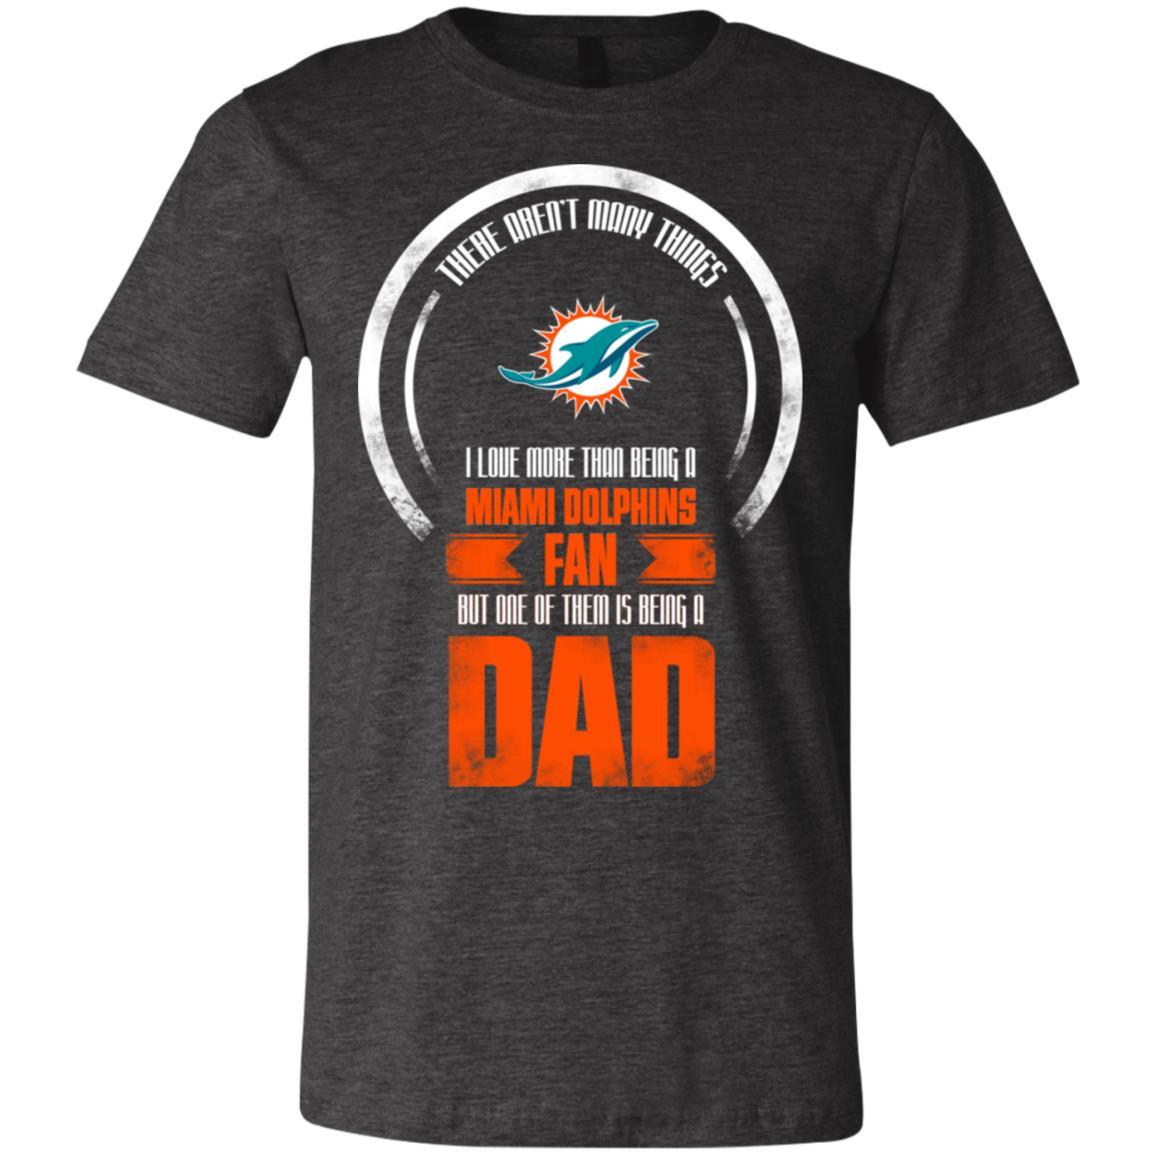 Miami Dolphins Shop - I Love More Than Being Miami Dolphins Fan Tshirt For Lover 3